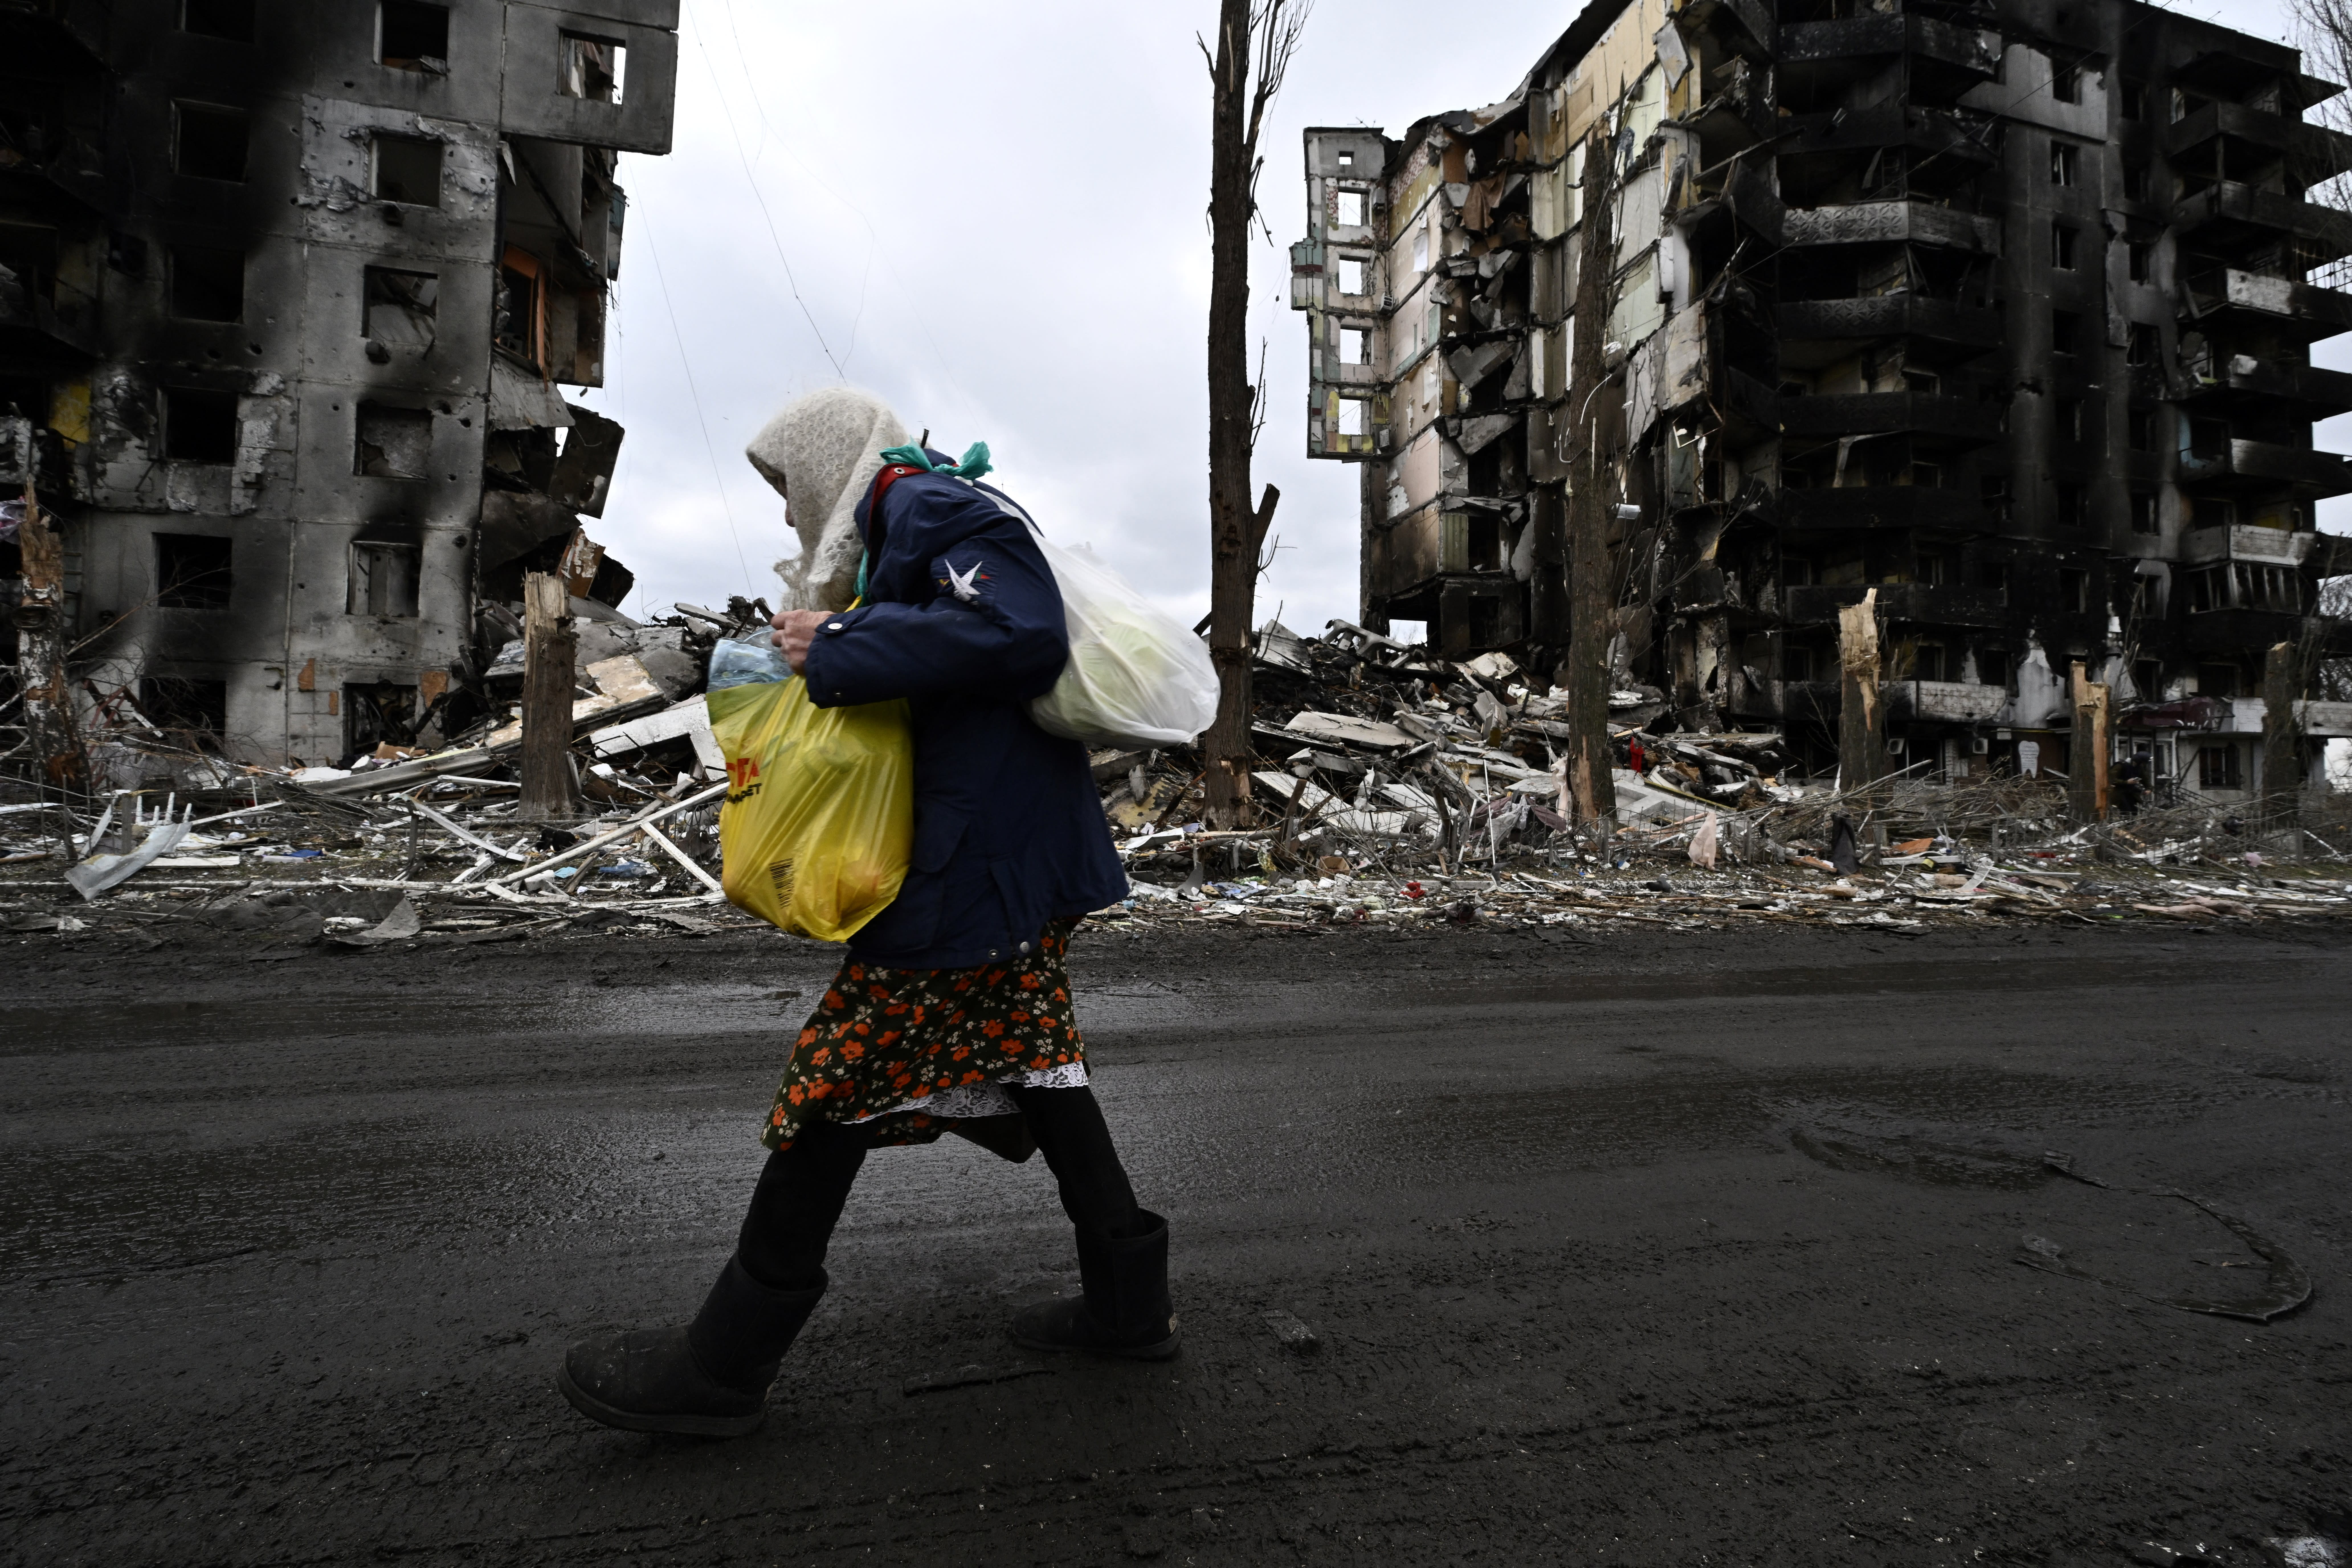 A woman walks in front of destroyed buildings in the town of Borodianka on April 6, 2022, where the Russian retreat last week has left clues of the battle waged to keep a grip on the town.